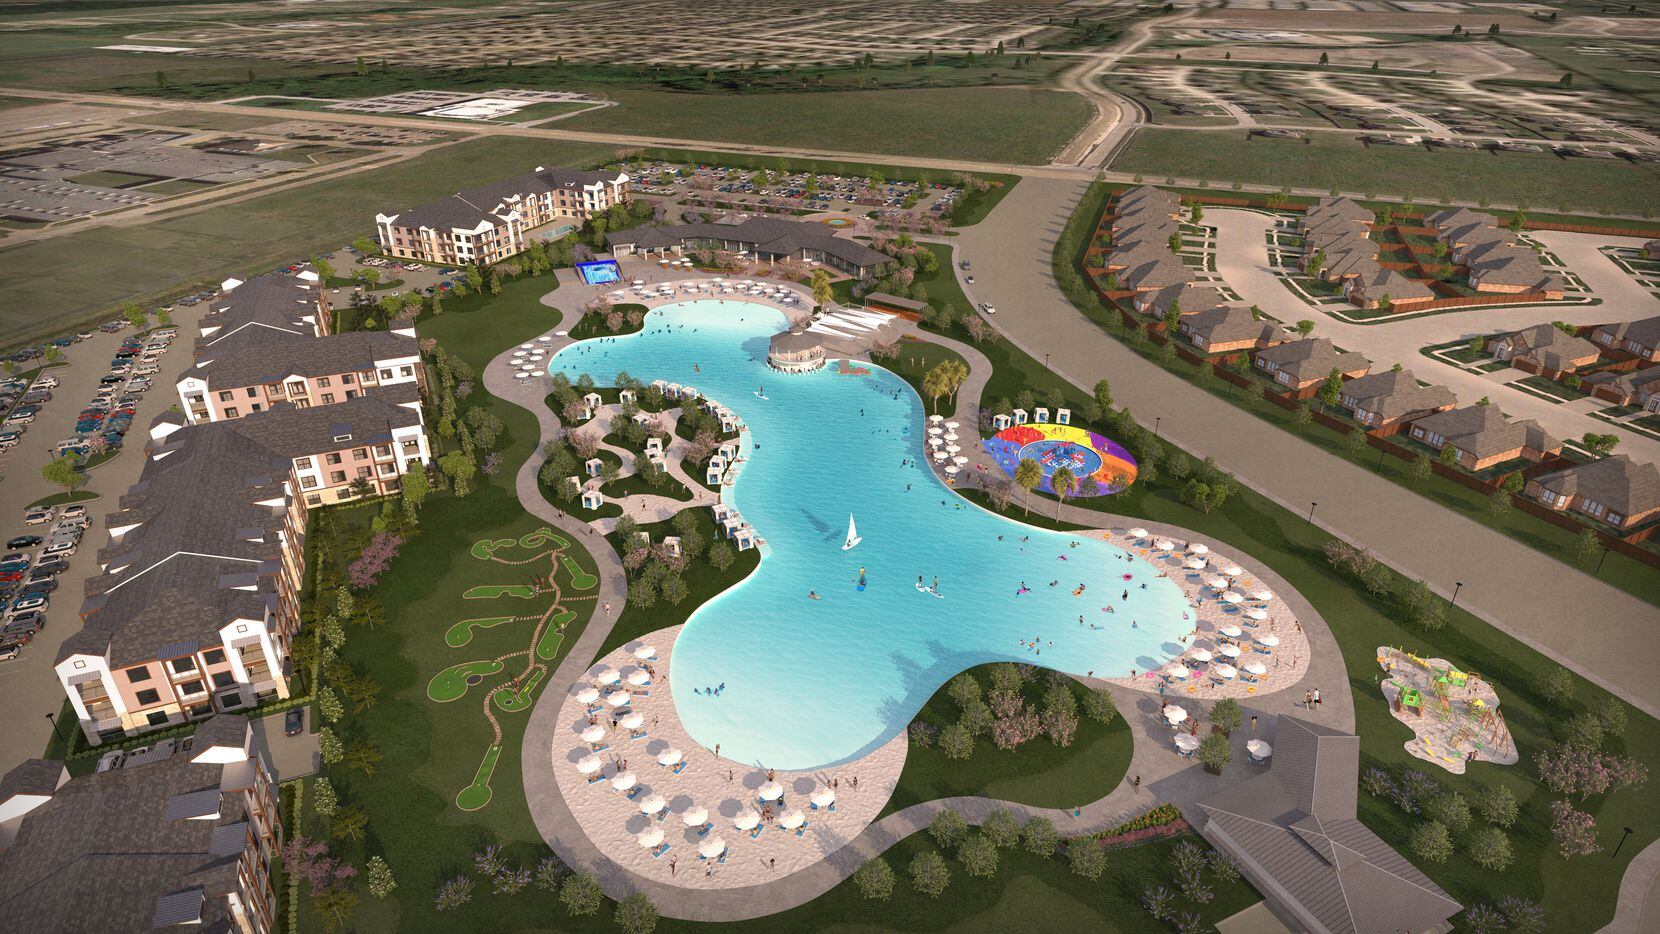 Megatel Homes' new Bellagio Lagoon community will feature about 400 homes centered around a manmade lagoon. The lagoon is expected to be completed by August 2022.